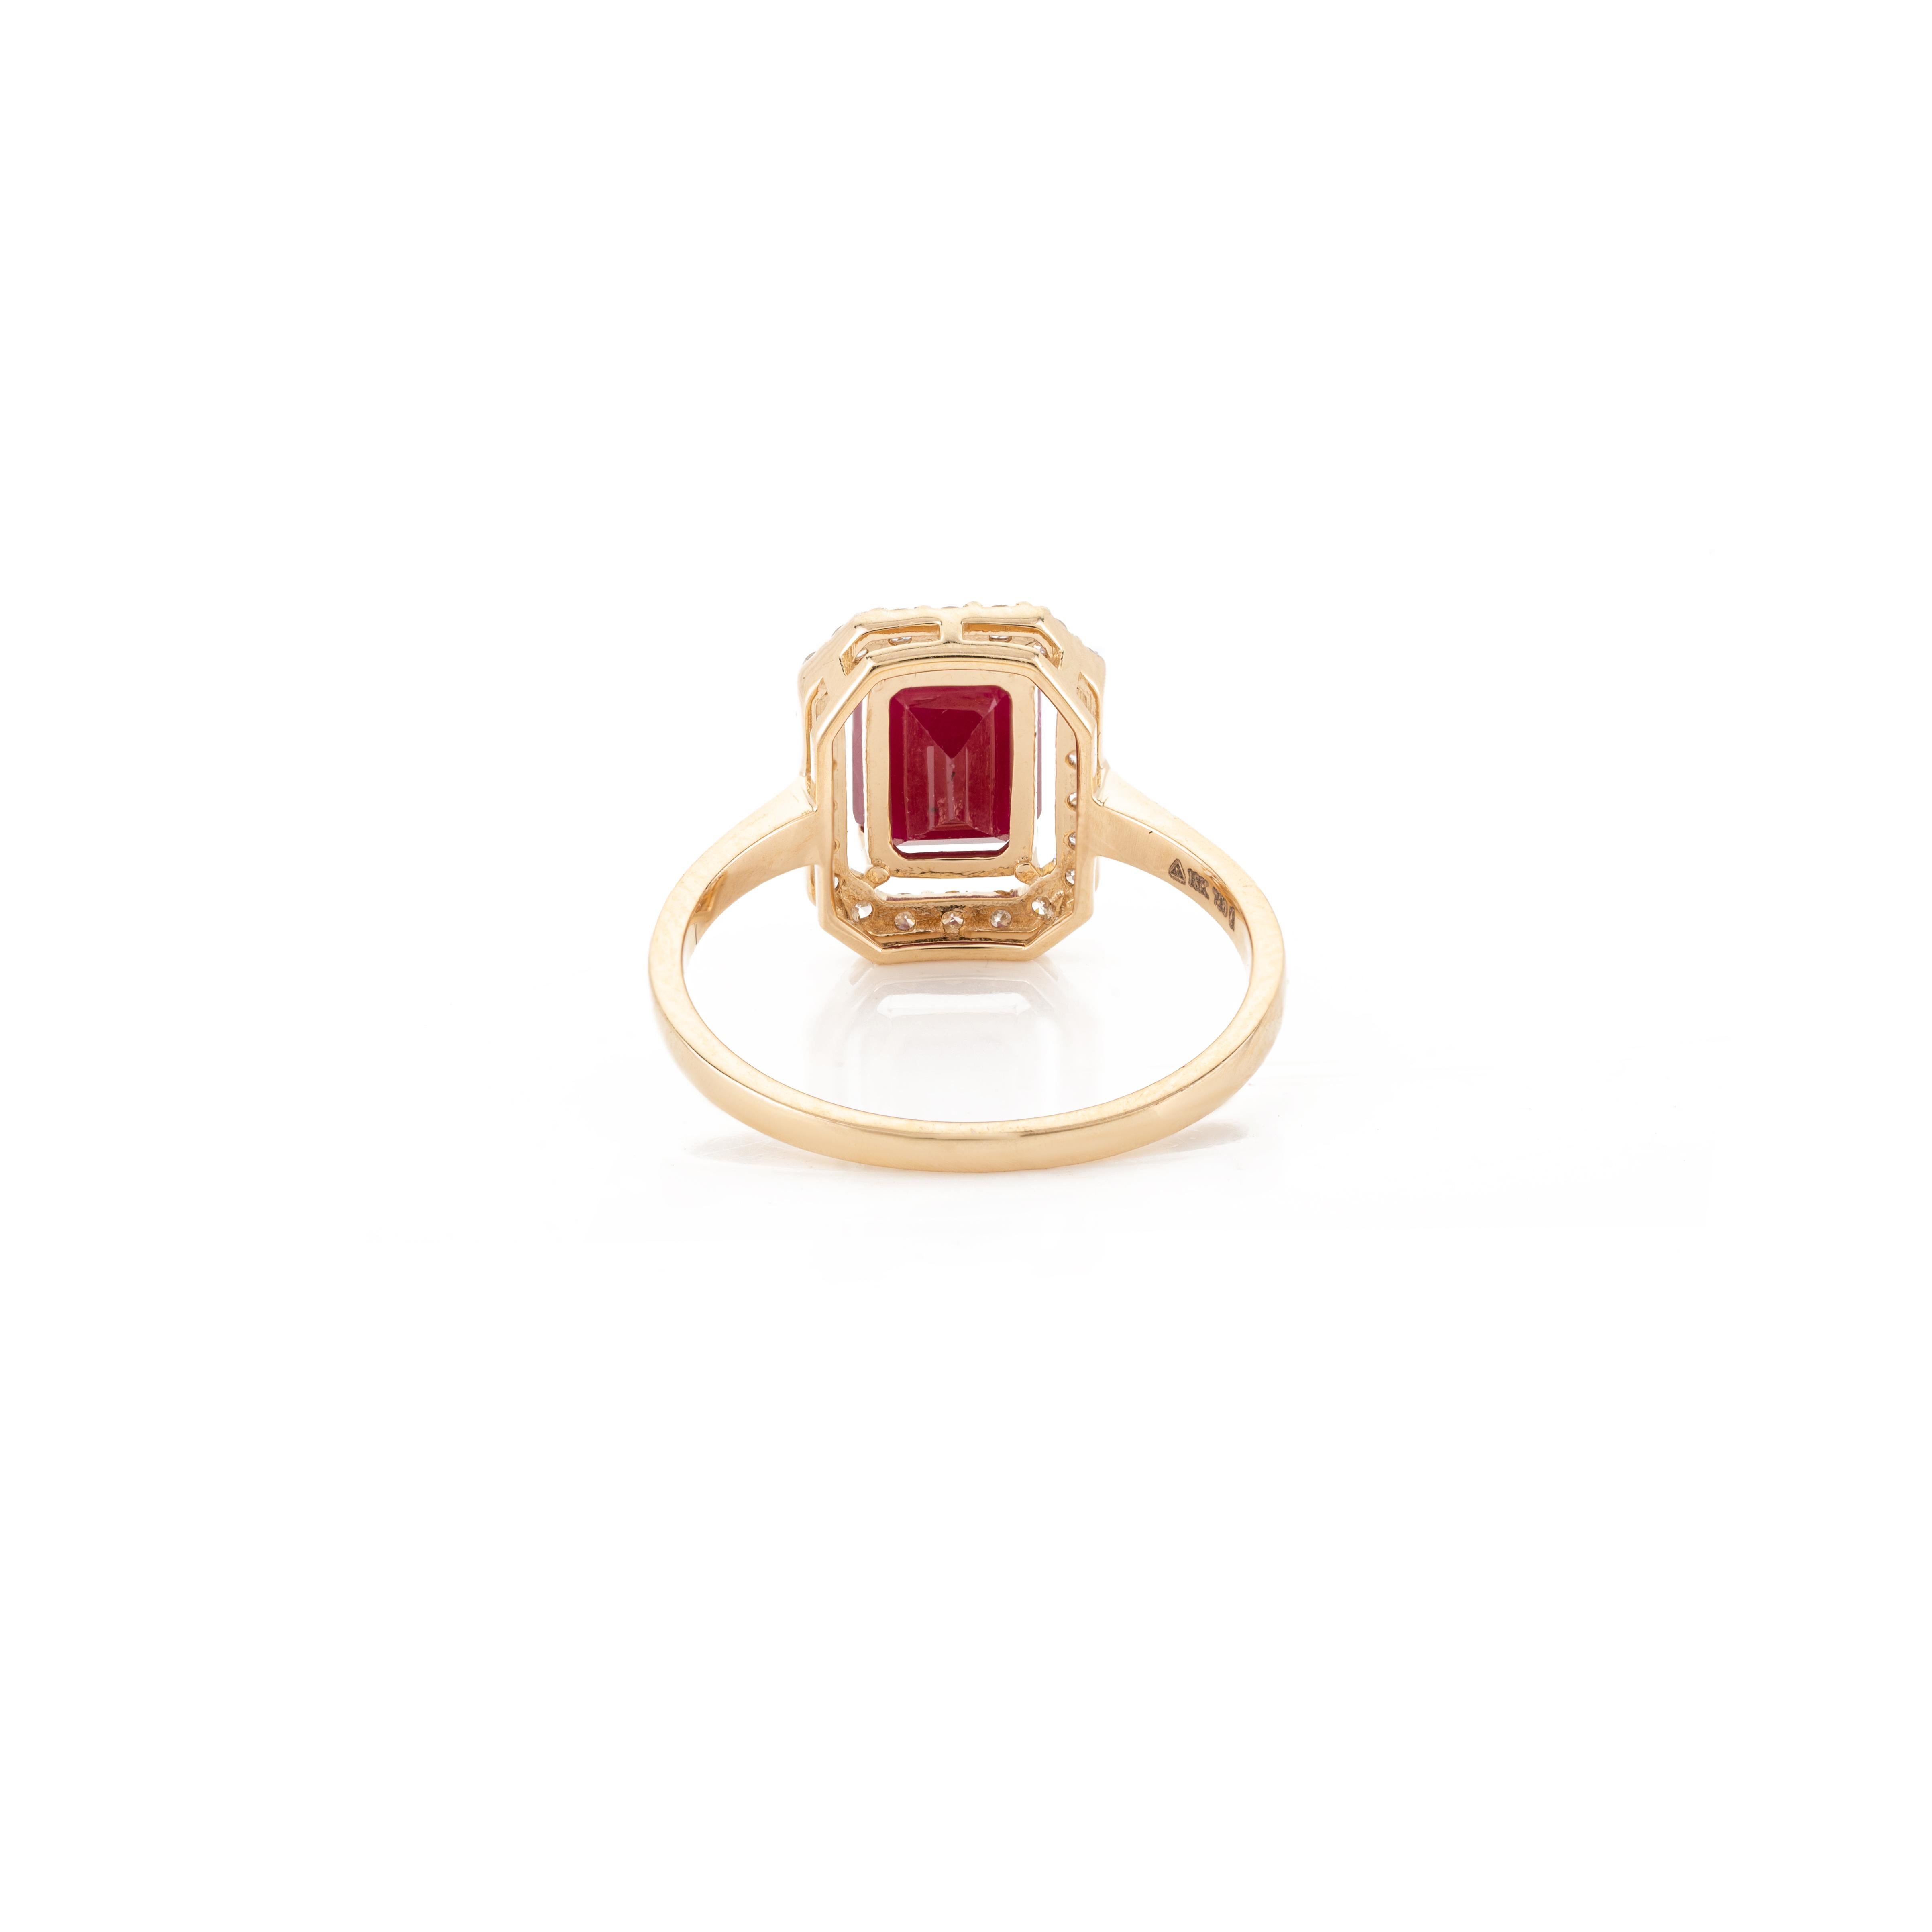 For Sale:  2.95 Carat Authentic Ruby Diamond Halo Engagement Ring in 18k Solid Yellow Gold 6